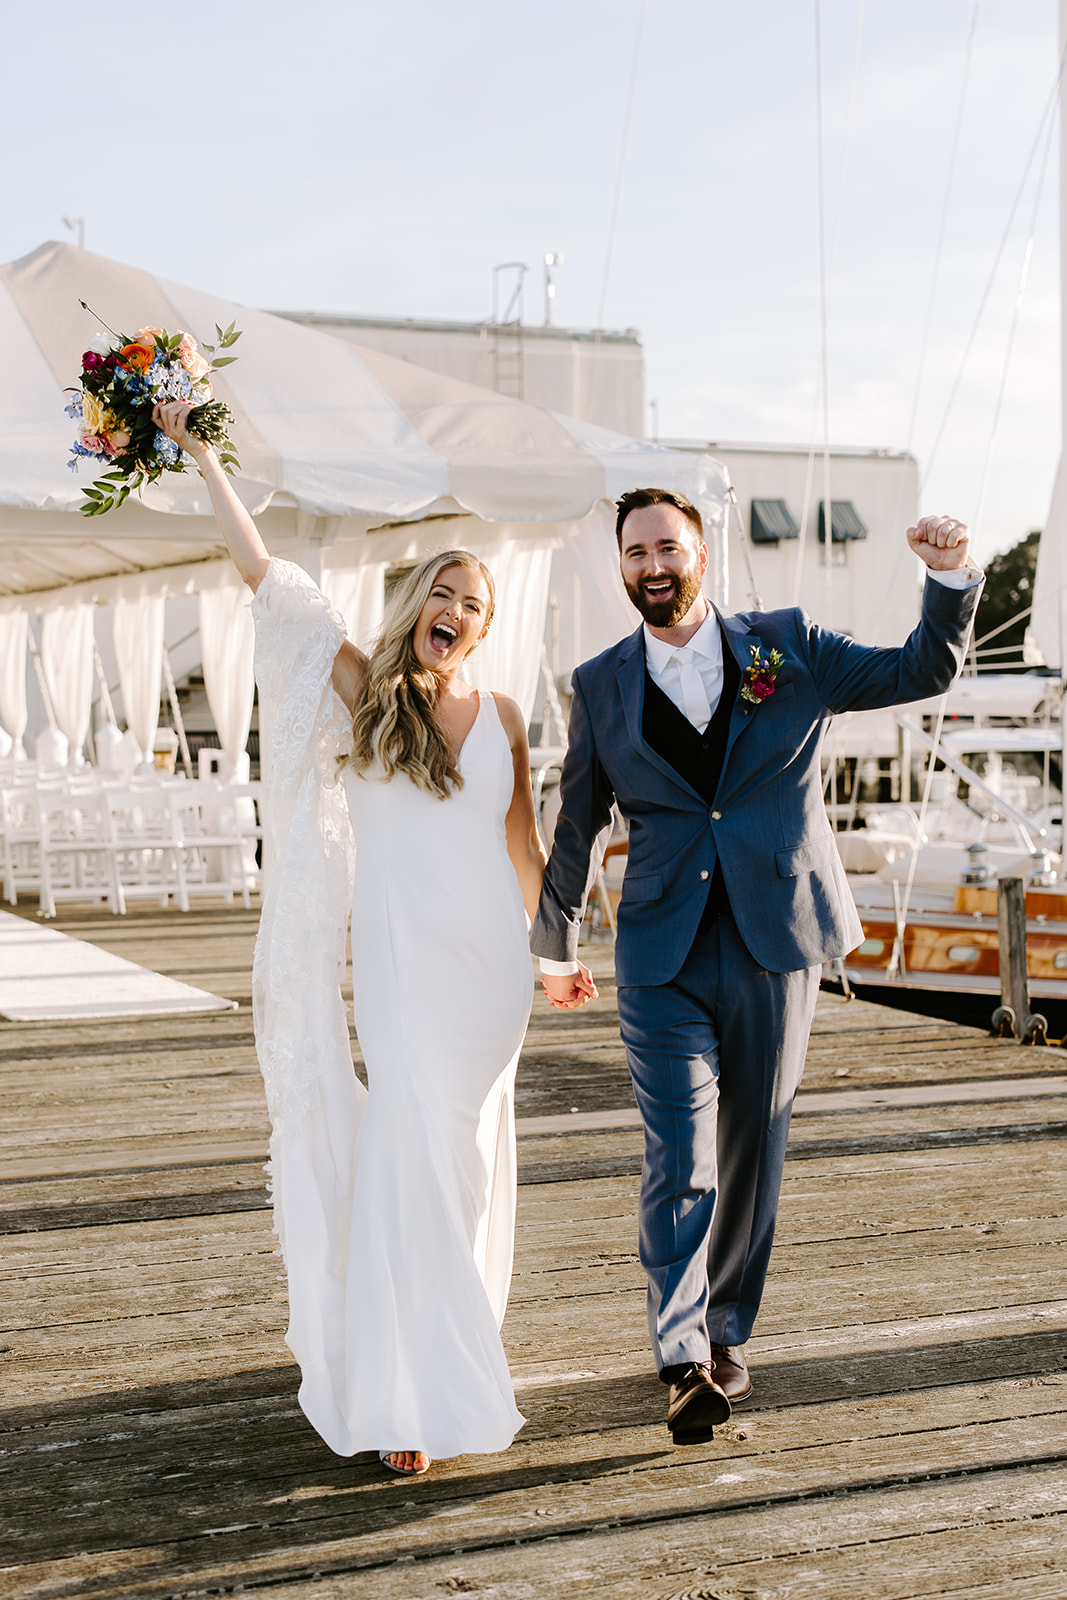 Gorgeous bride and groom pose on the docks after their dreamy New England wedding venue